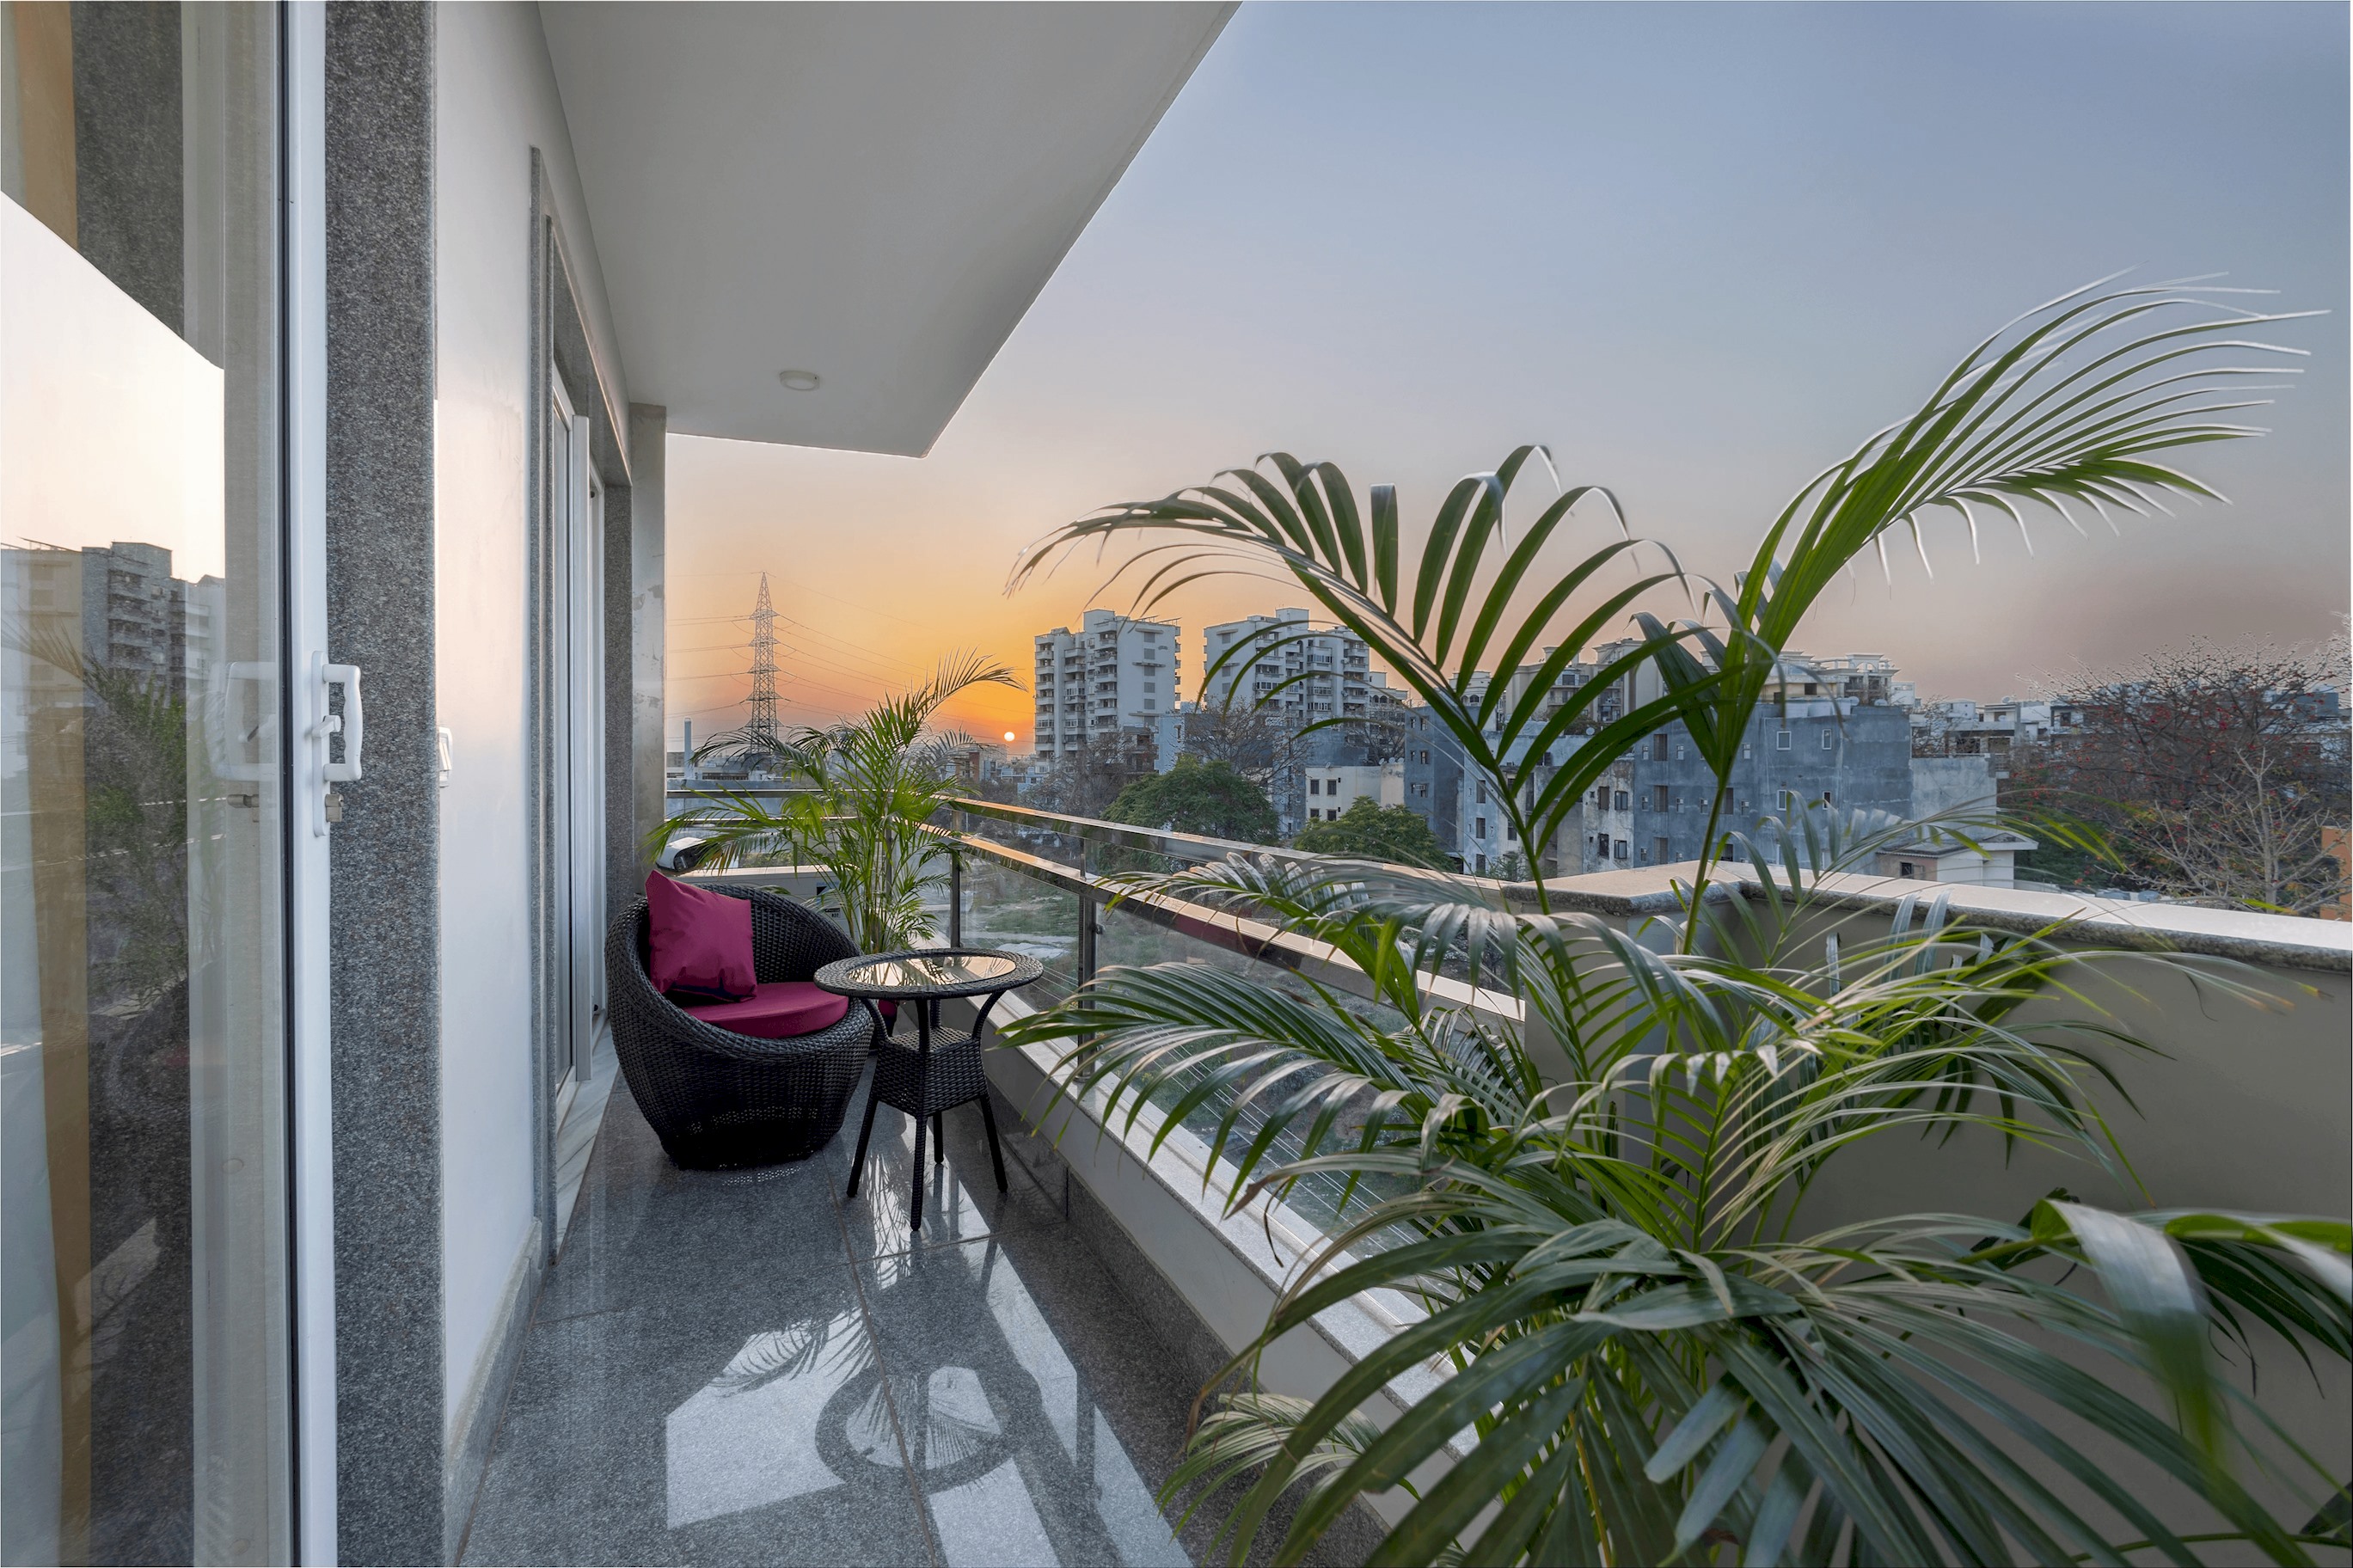 A serene balcony scene with a cup of tea, inviting relaxation and contemplation with a soothing view